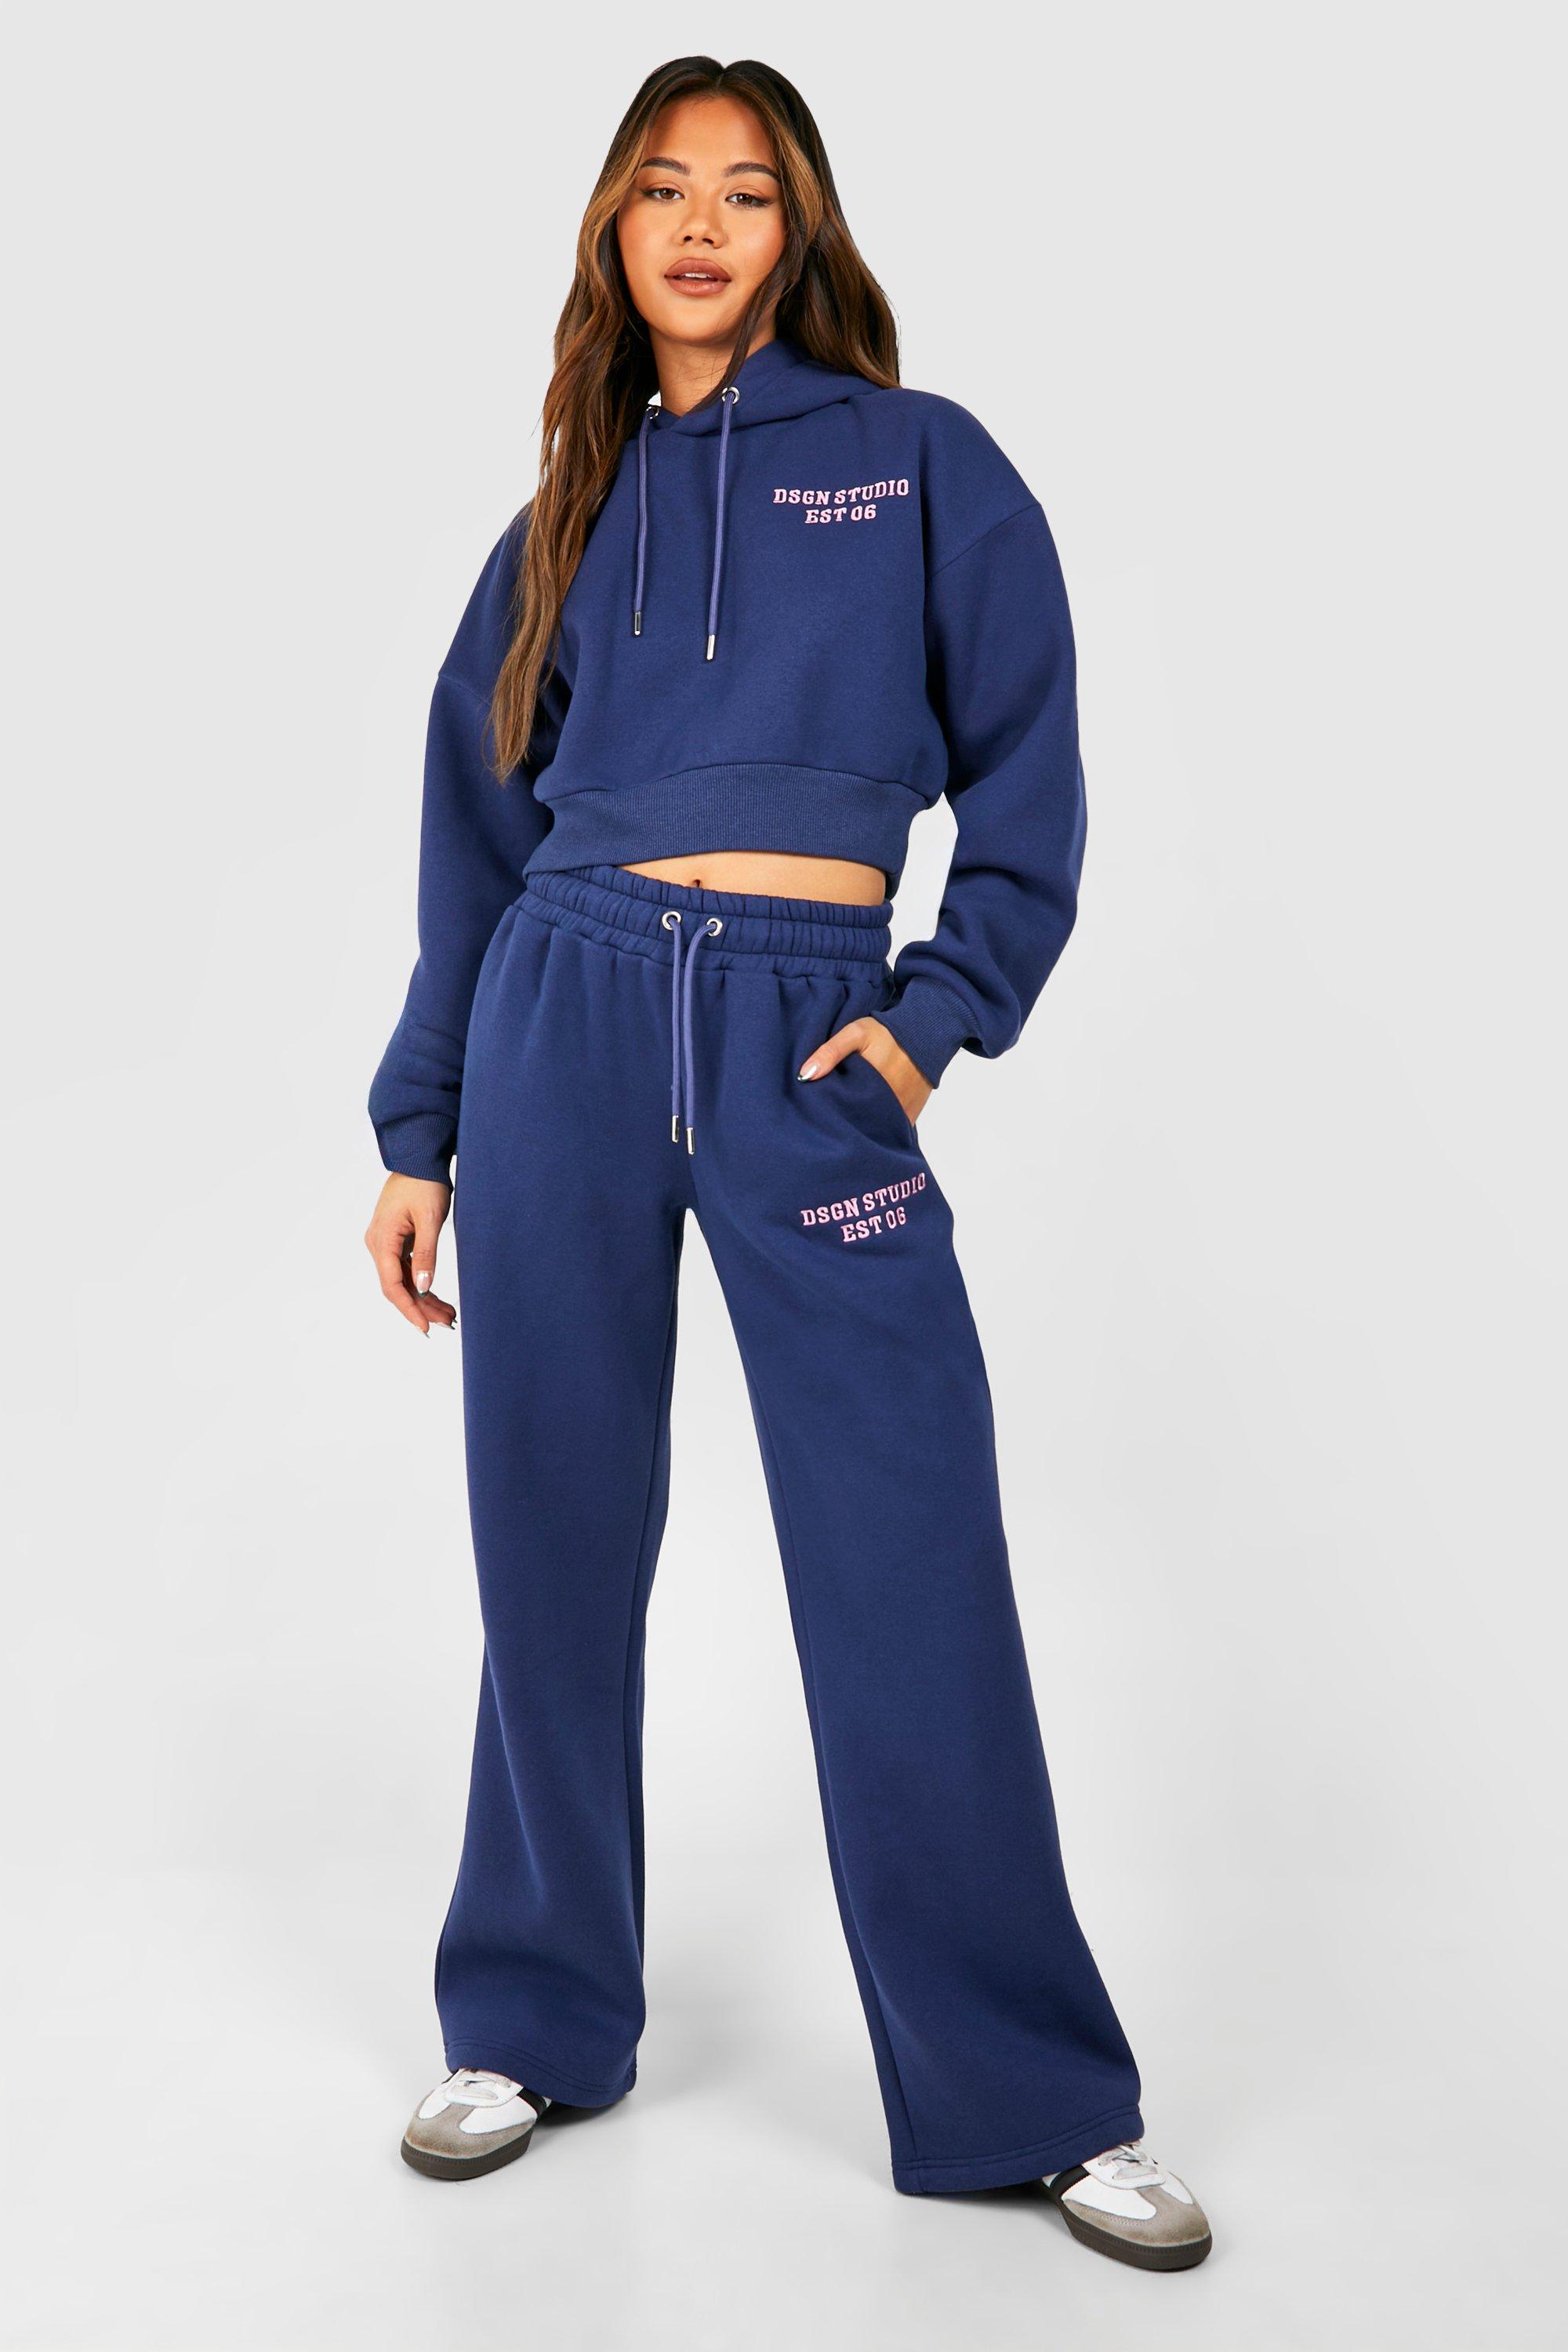 Image of Dsgn Studio Embroidered Cropped Hooded Tracksuit, Navy